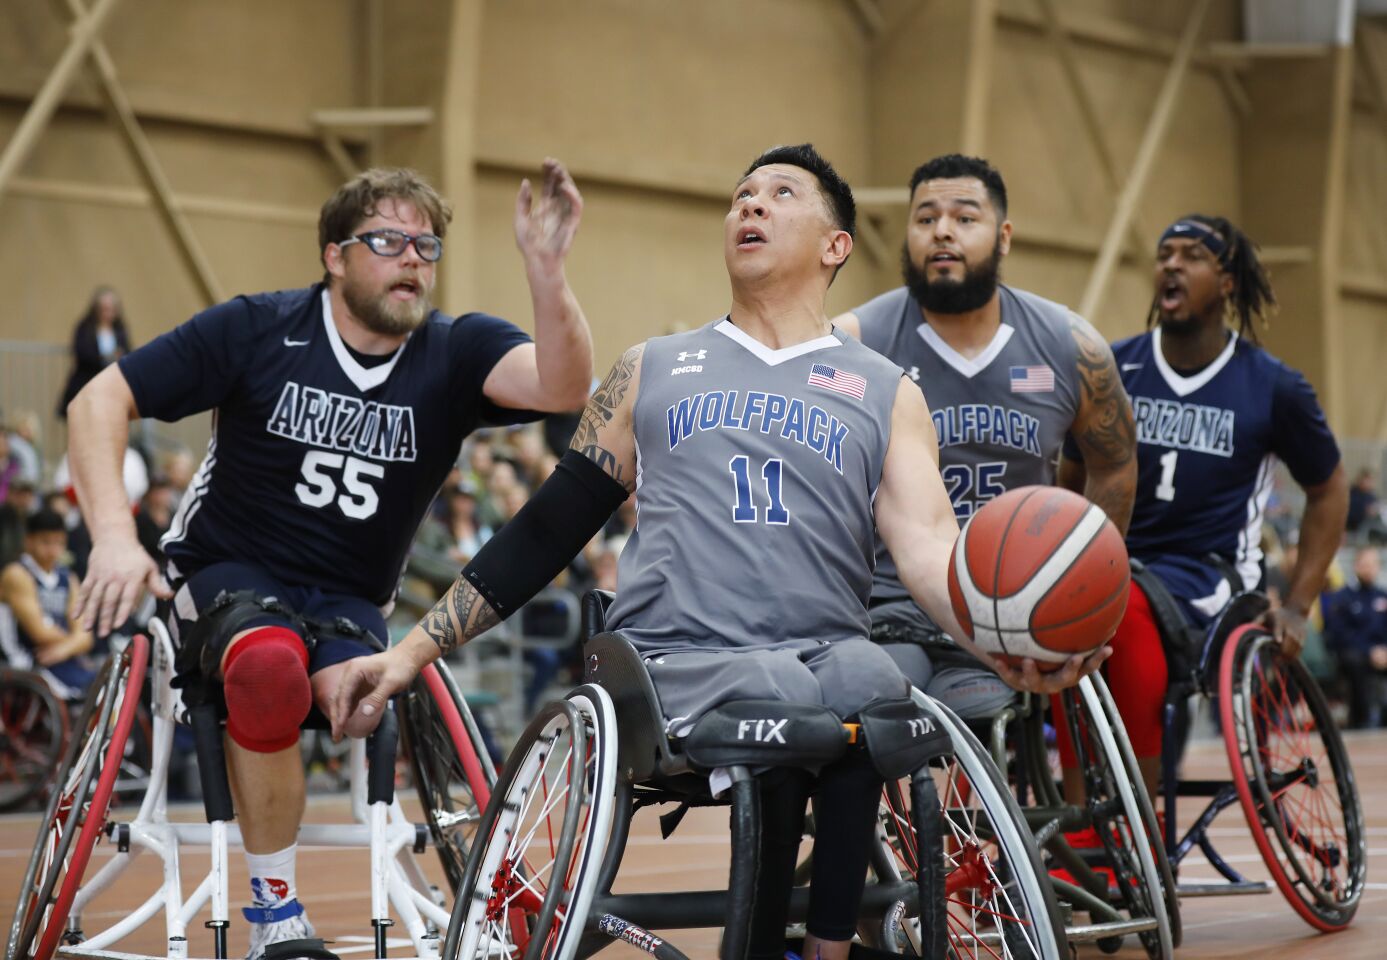 Jhoonar Barrera, center, of the Naval Medical Center San Diego Wolfpack goes for a shot as Karl Yates of the University of Arizona defends during the 4th Annual Brad Rich Invitational wheelchair basketball tournament at the Del Mar Fairgrounds on Feb. 9, 2020.